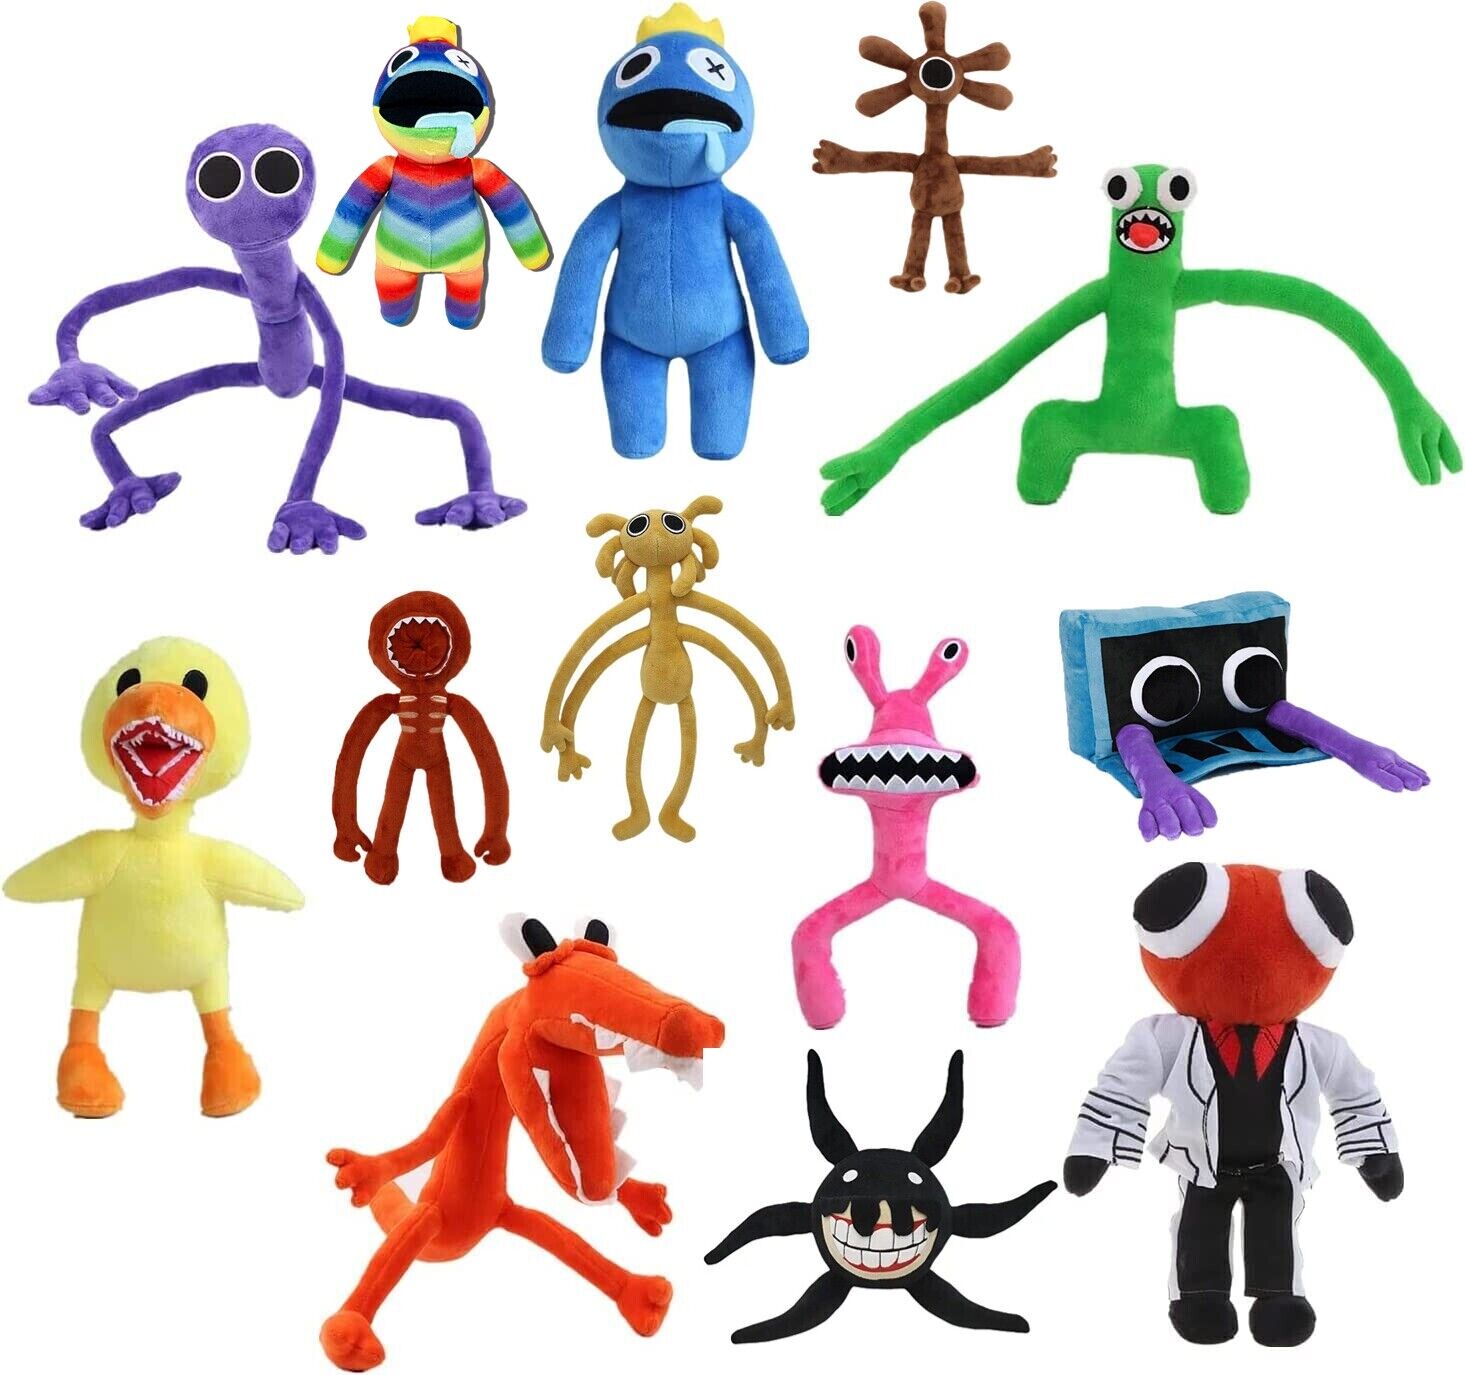 Rainbow Friends game Chapter 2 Plush figures stuffed doll gift for fans kids